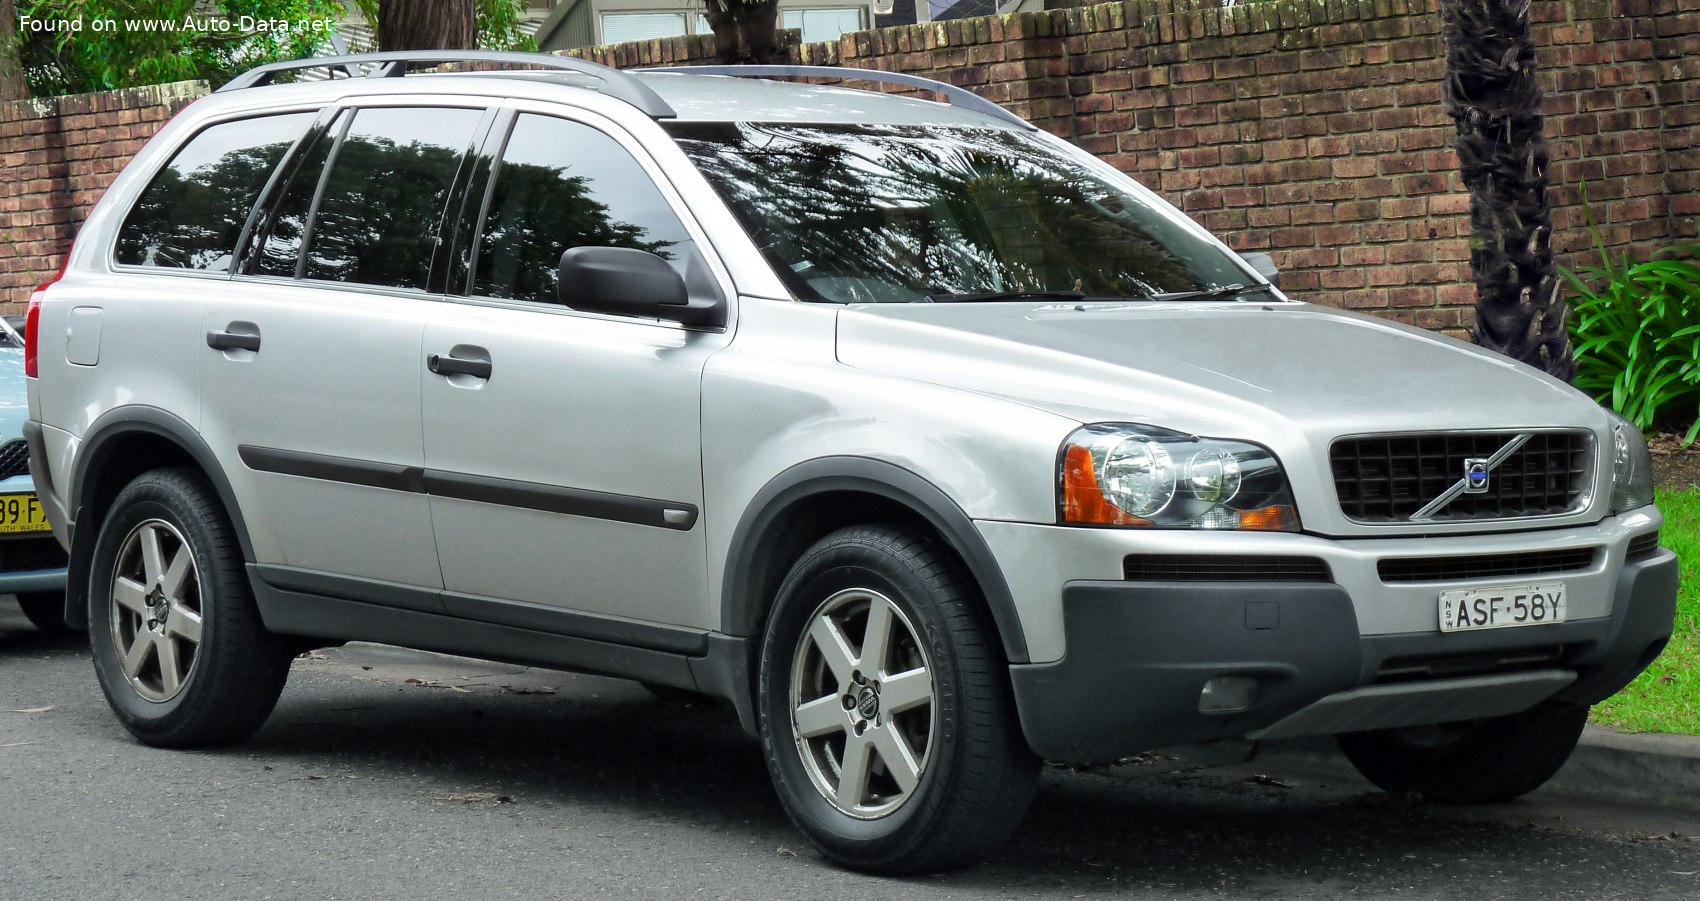 2006 Volvo XC90 3.2 (243 Hp) AWD | Technical specs, data, fuel consumption,  Dimensions